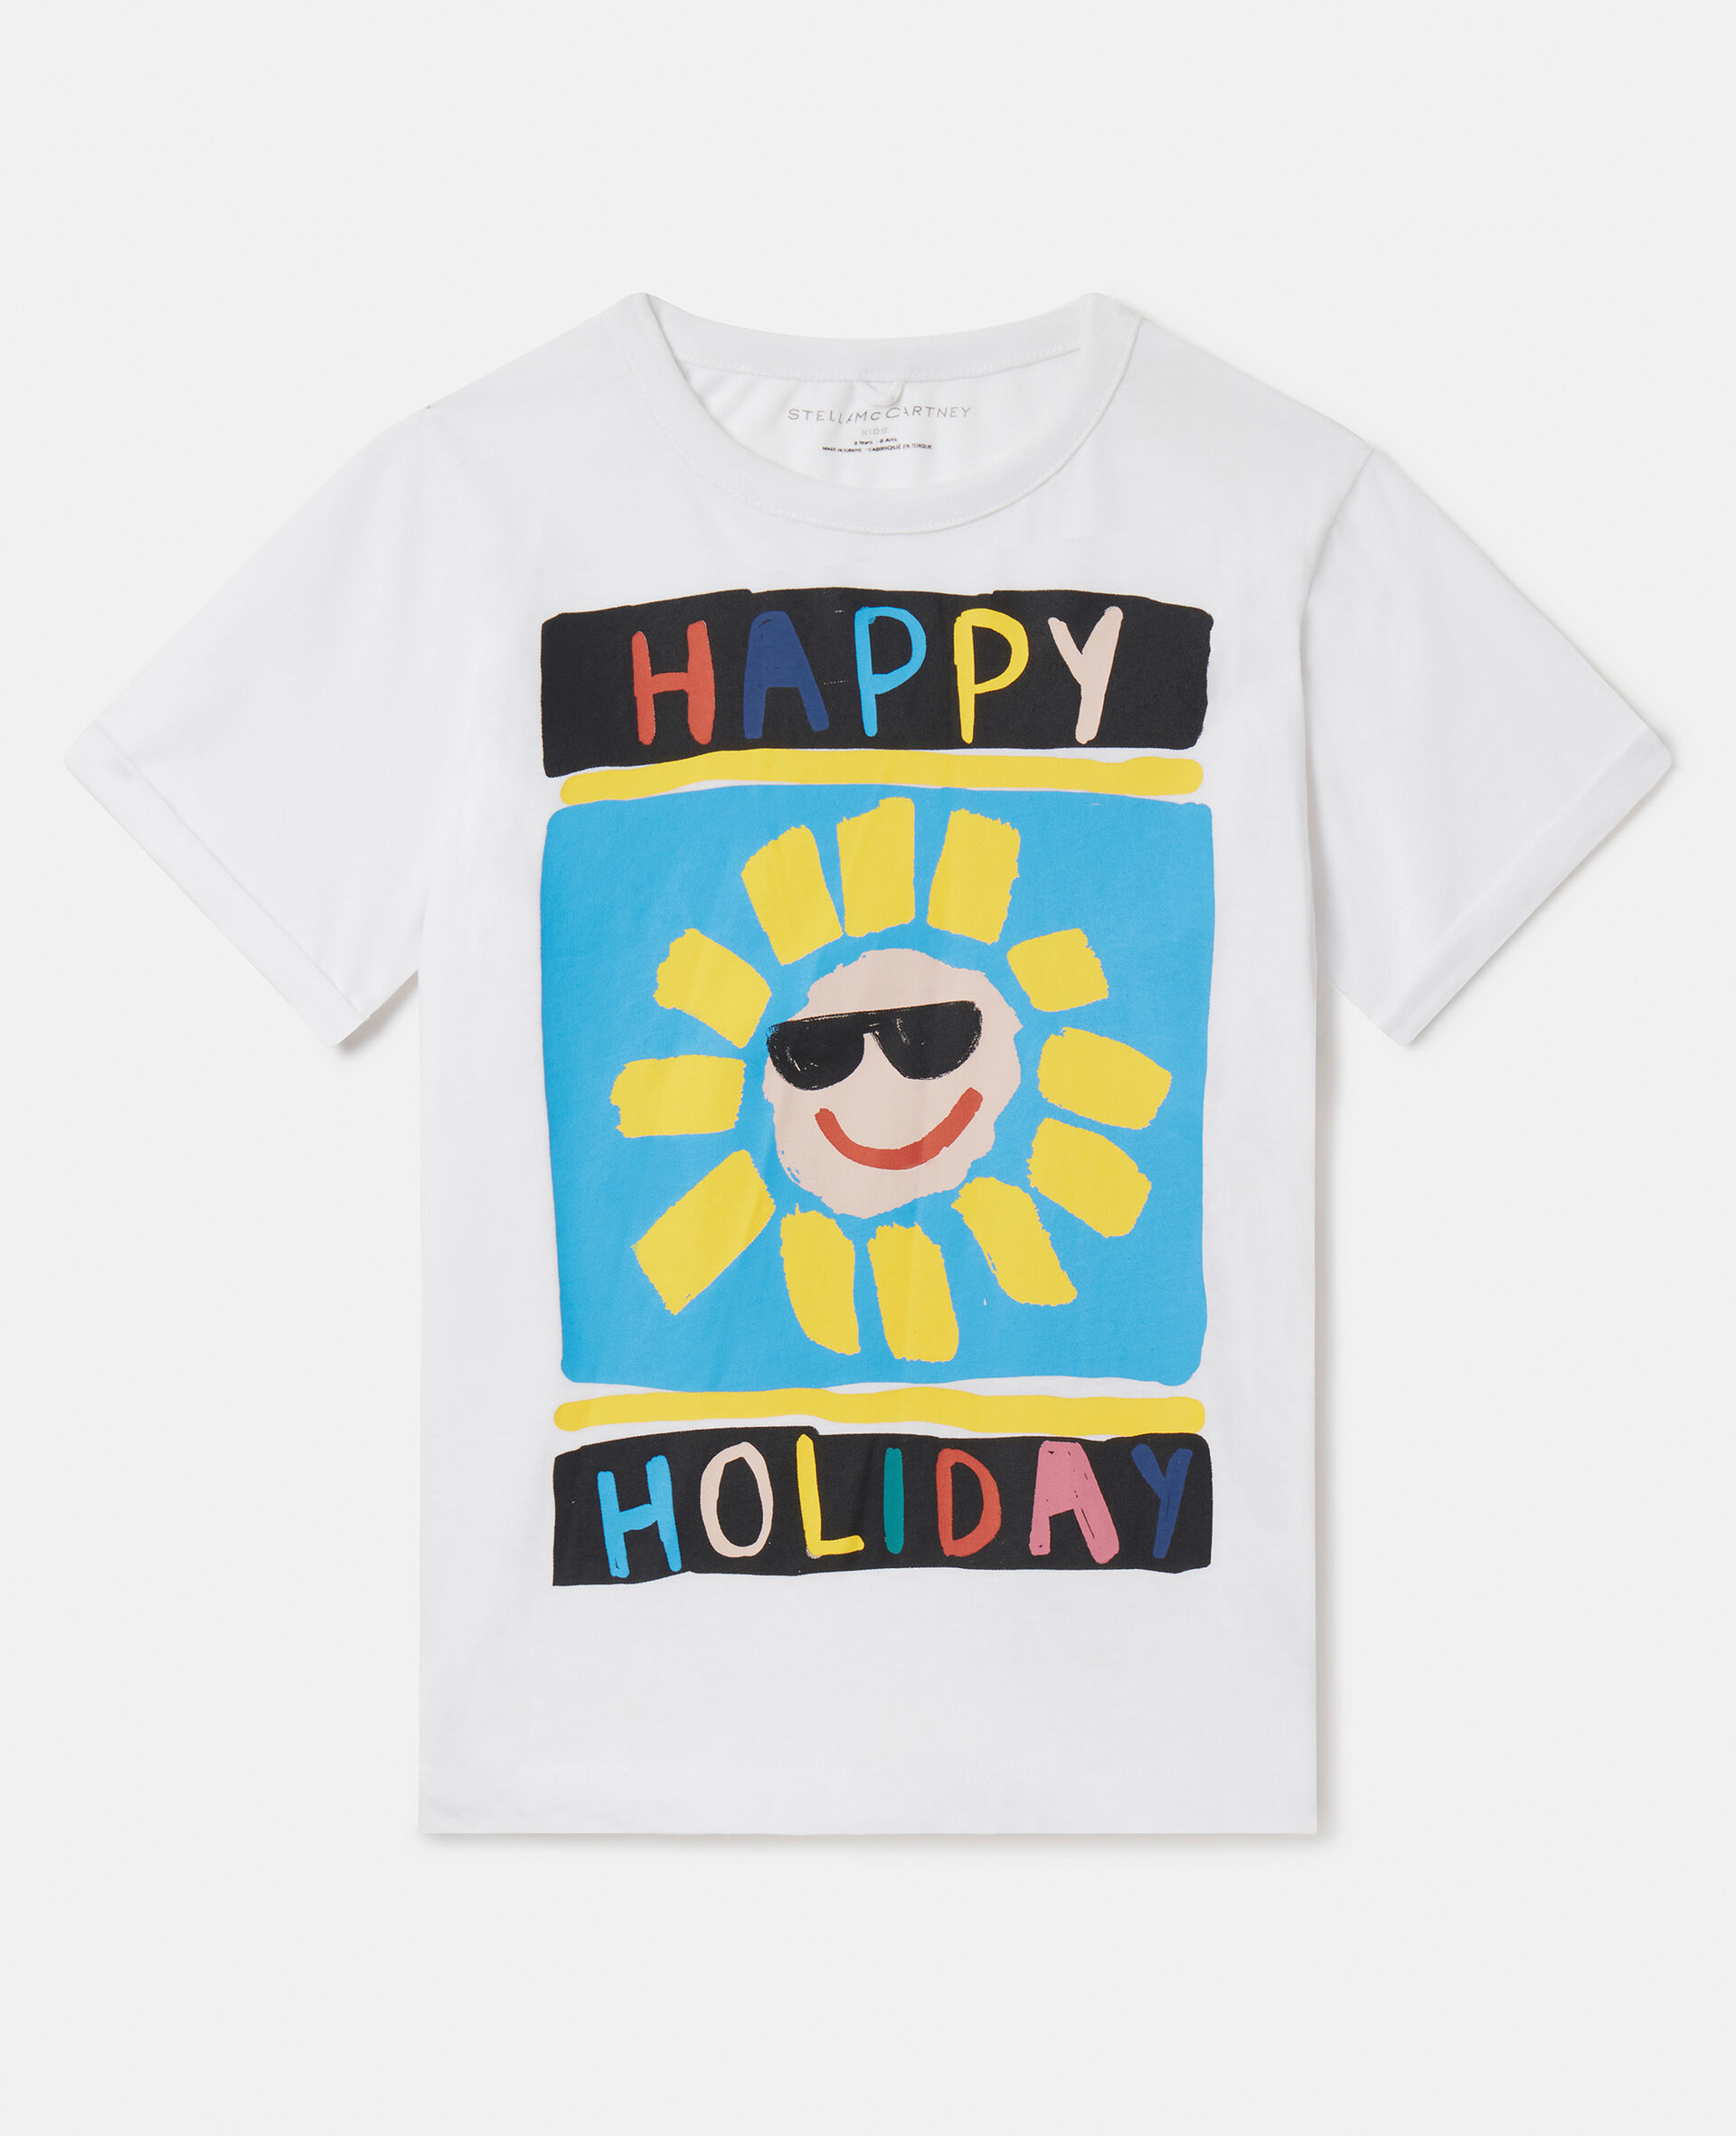 Happy Holiday T-Shirt-Rosa-large image number 0